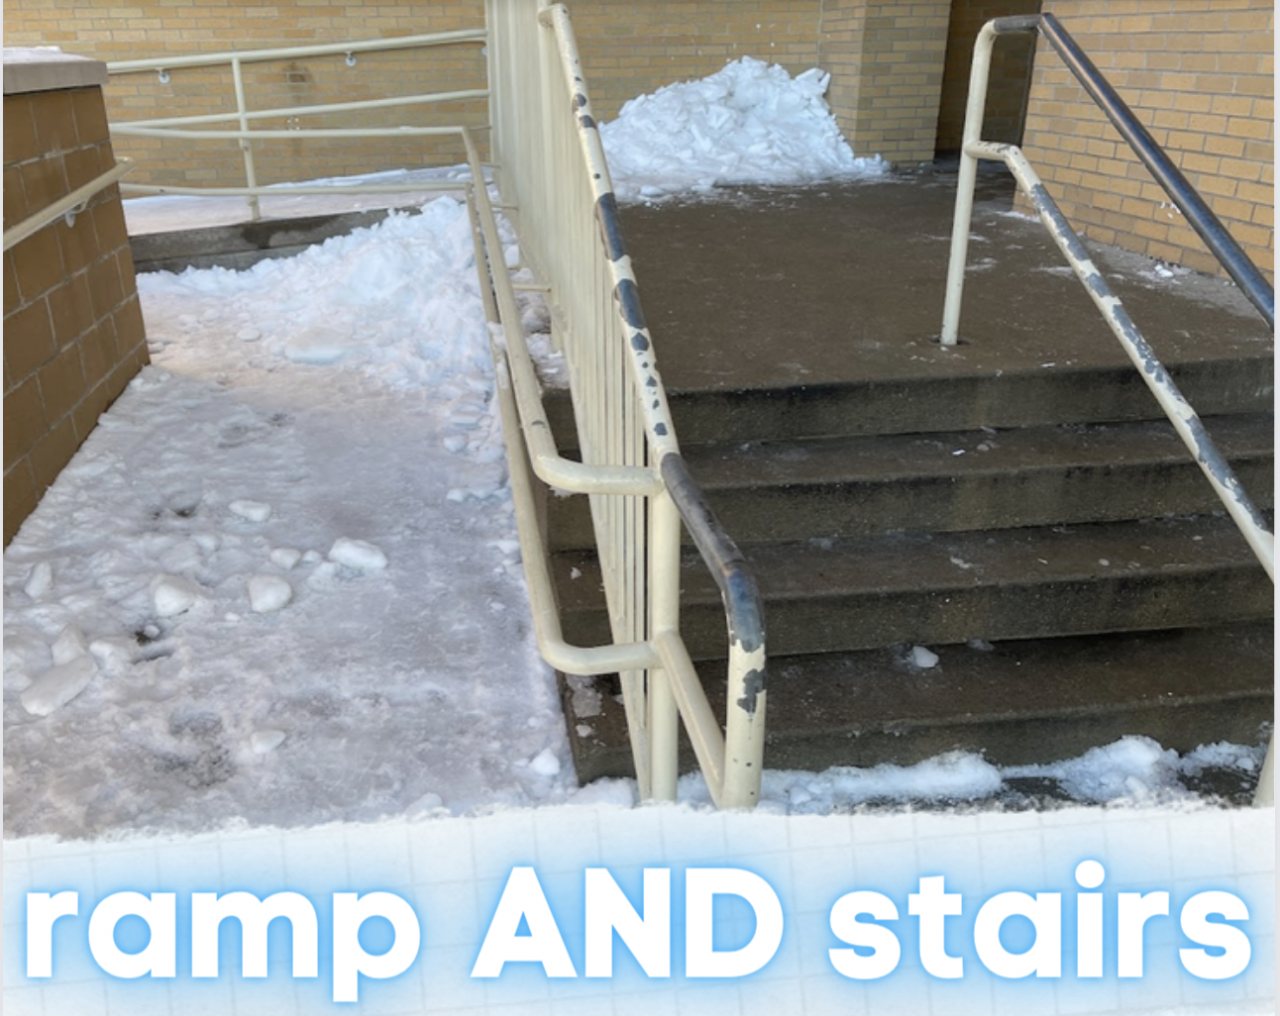 The ramp AND stairs